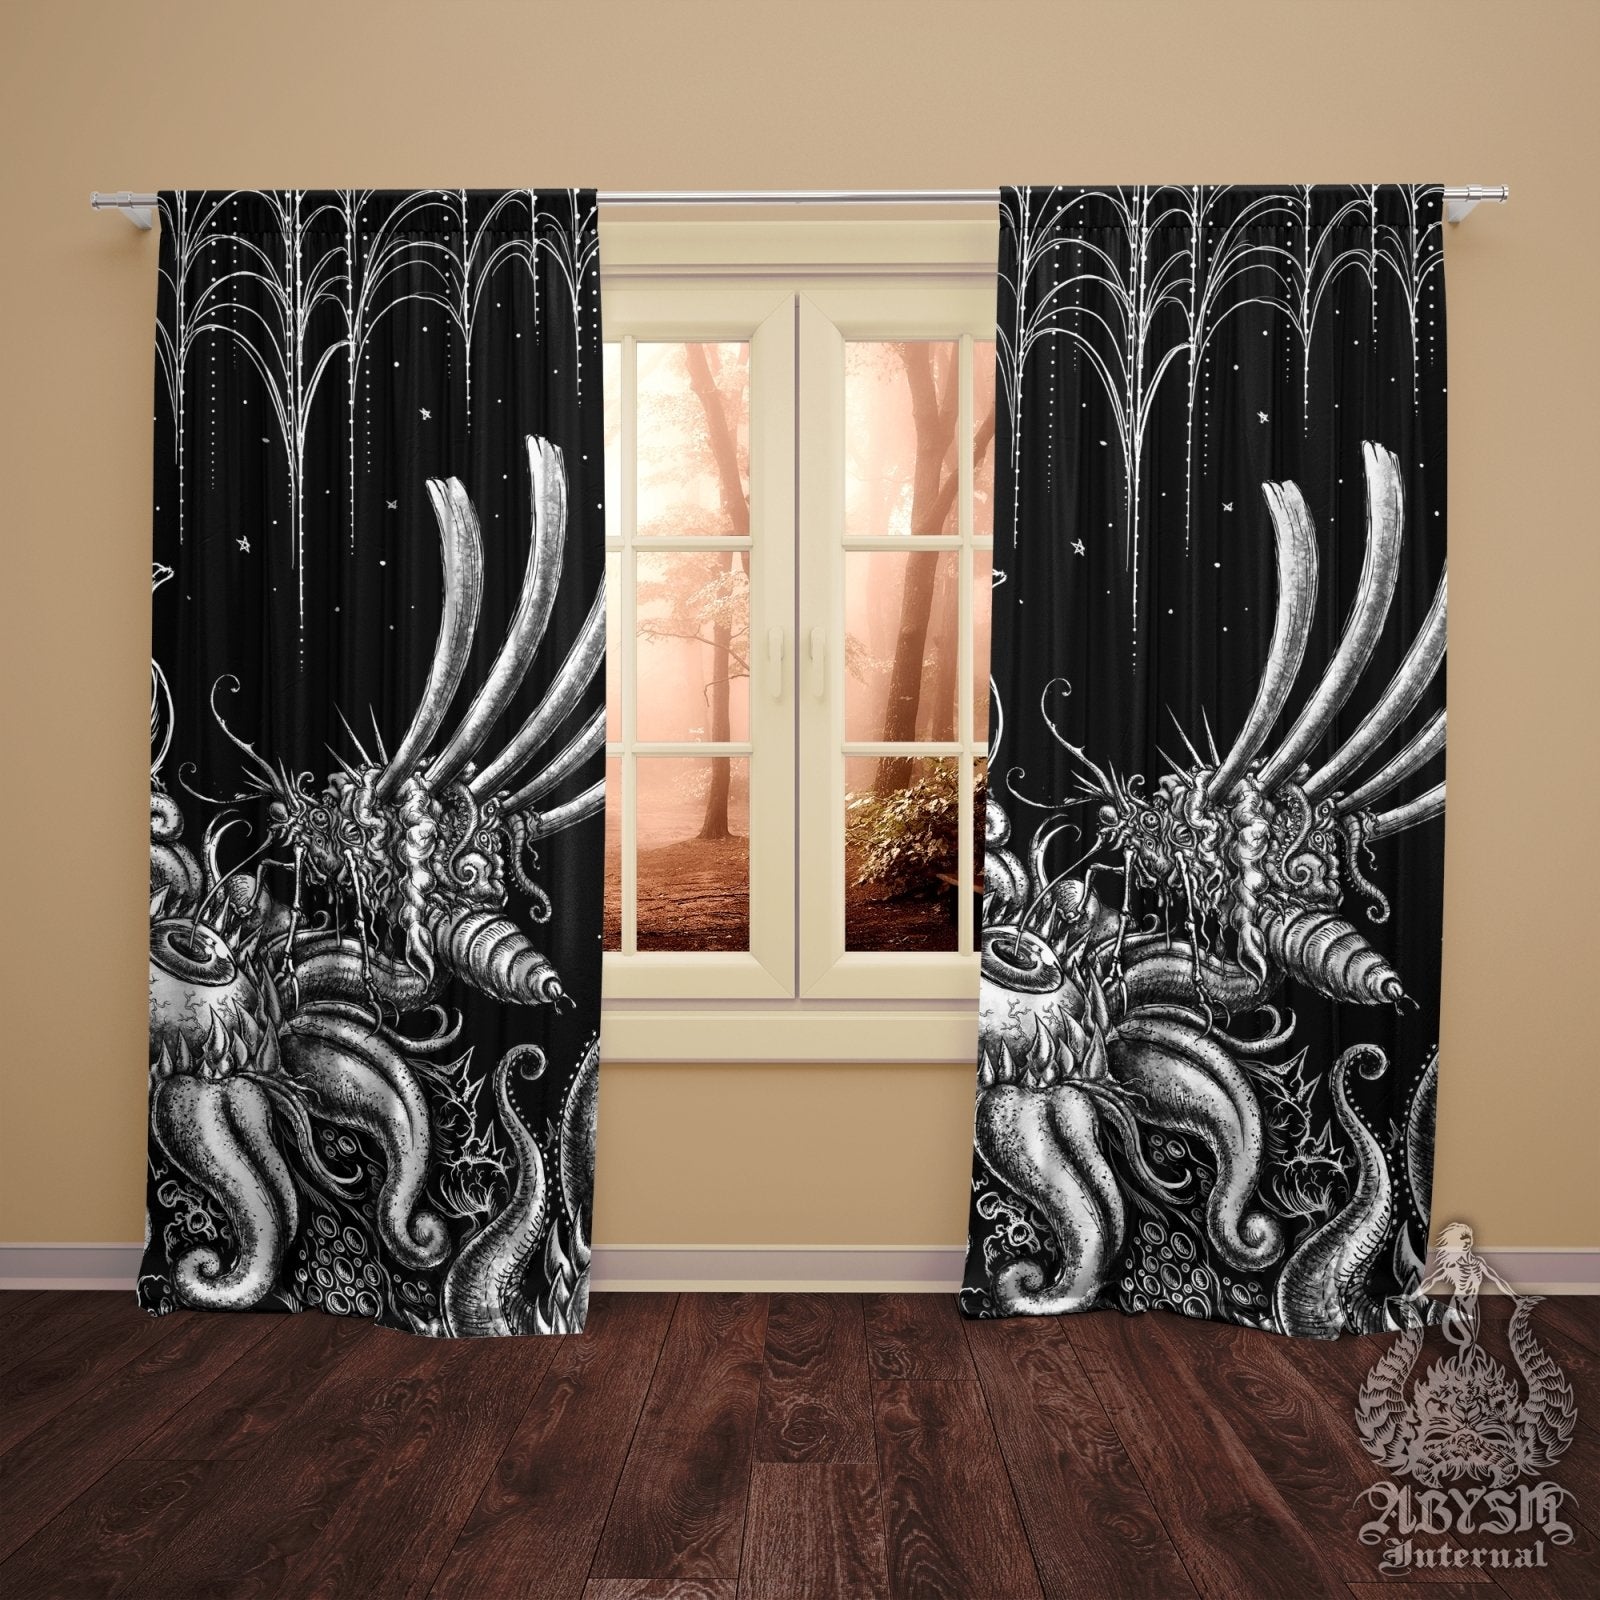 Gross Blackout Curtains, Long Window Panels, Macabre Art Print, Horror Room Decor - Gothic Hell, Gore Bloodfly - Abysm Internal